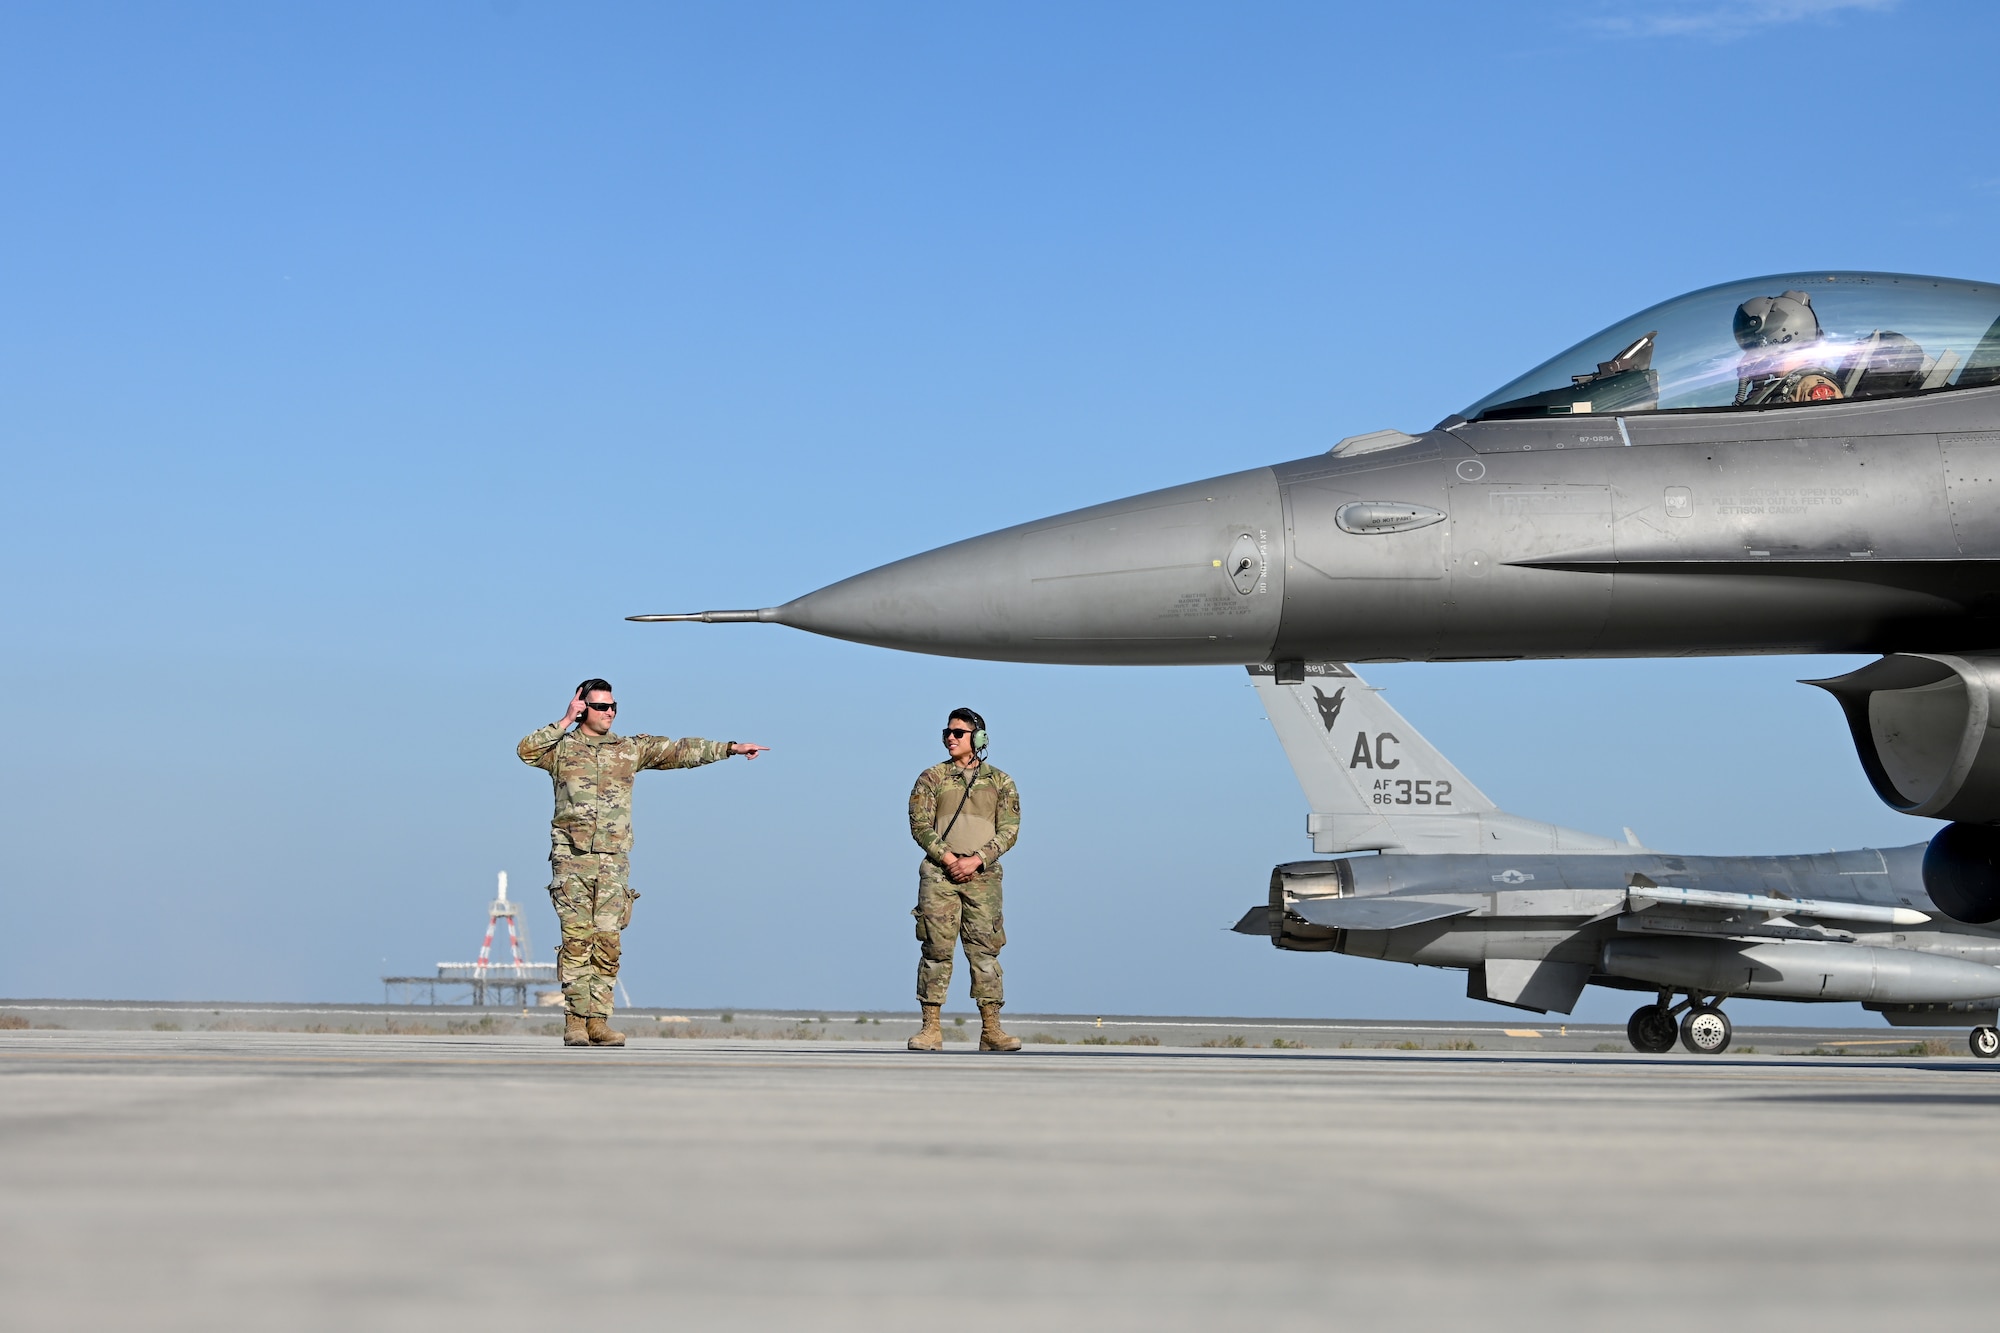 SrA Ortolani, right, watches as TSgt Bollock, a logistician, embodies the multi-capable Airman concept by marshaling a F-16 Fighting Falcon.